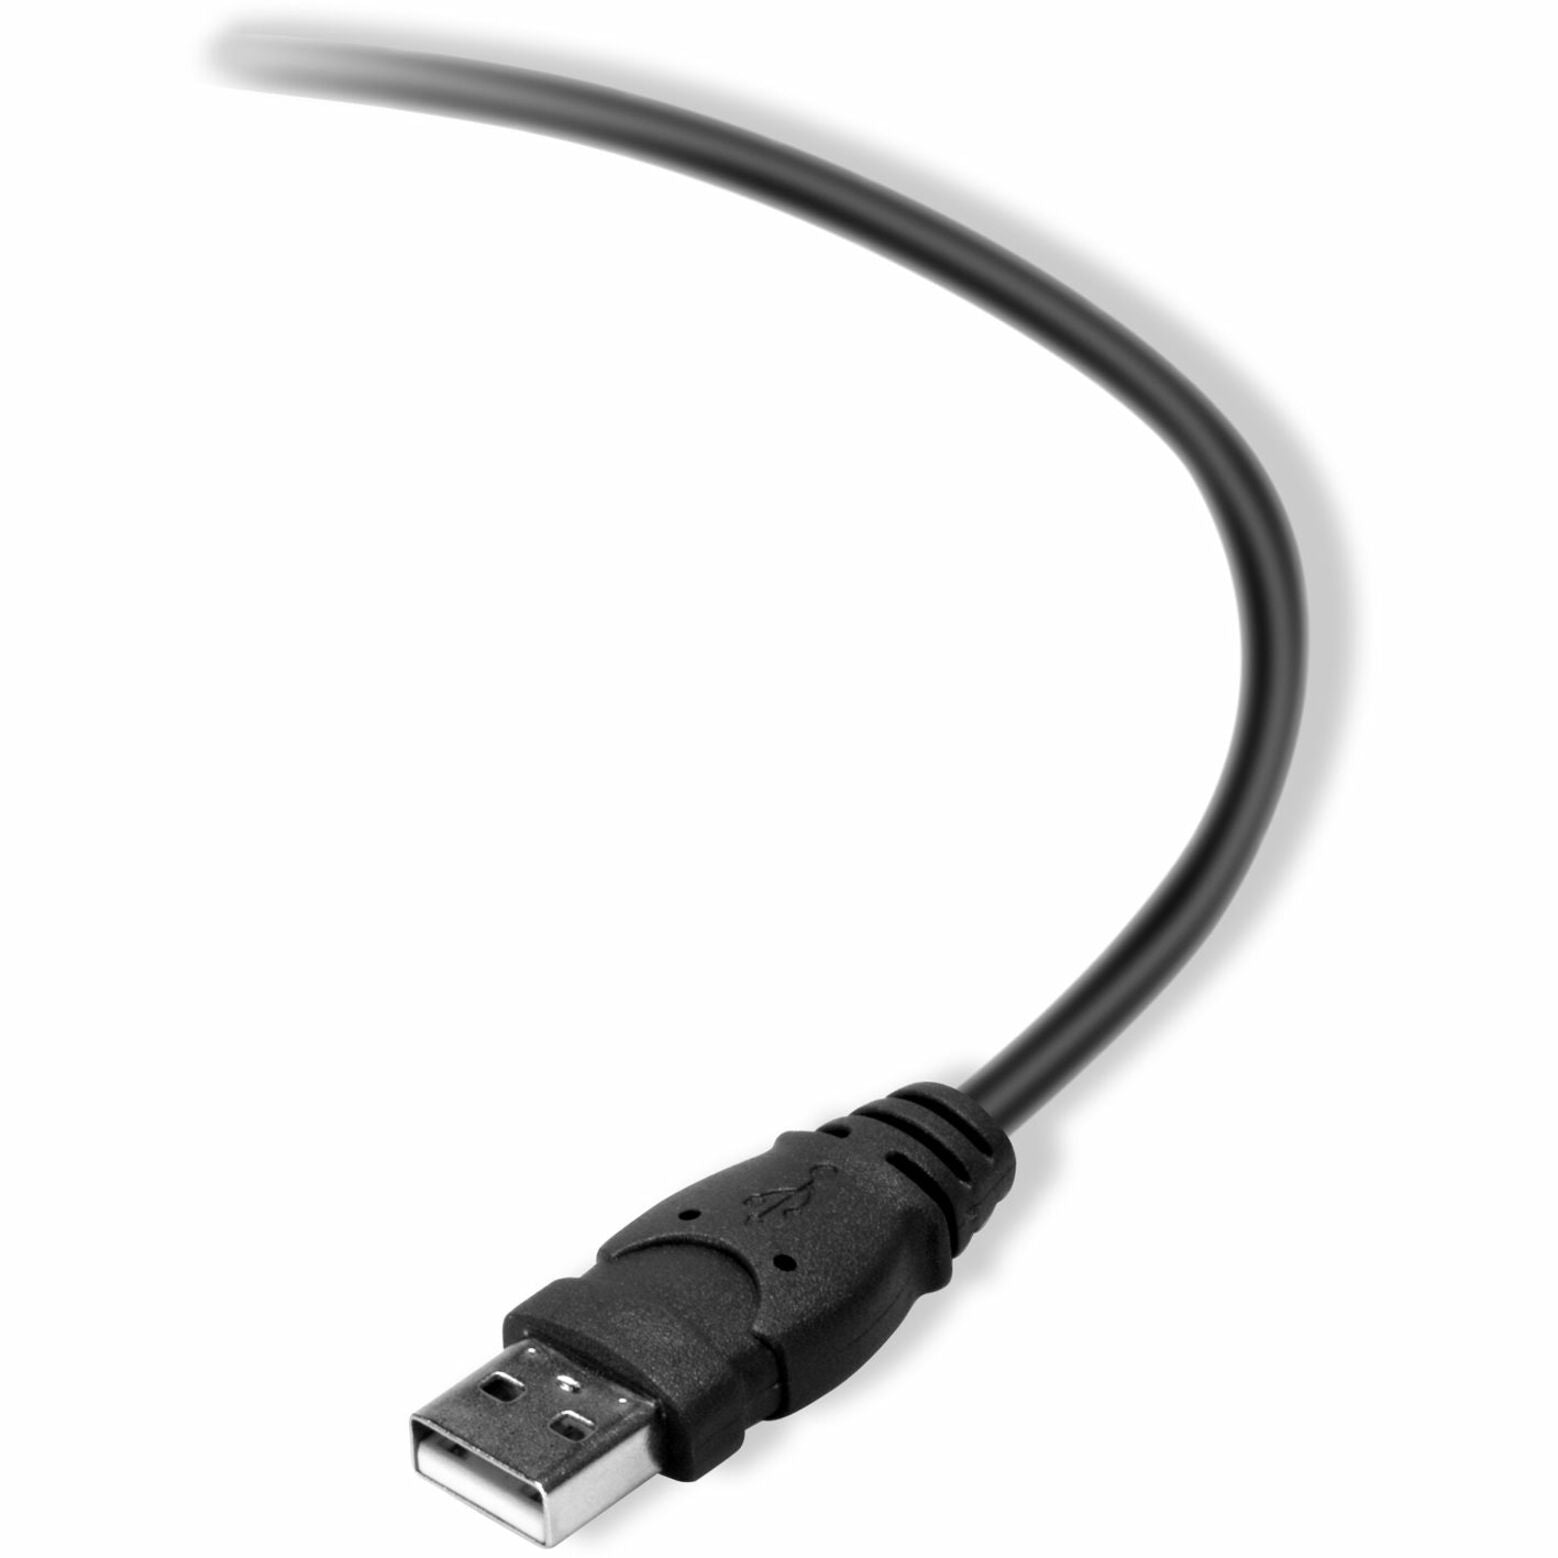 Belkin F3U154bt0.9M 2.0 USB-A to USB-B Cable, 2.95 ft, Molded, Strain Relief, Corrosion Resistant